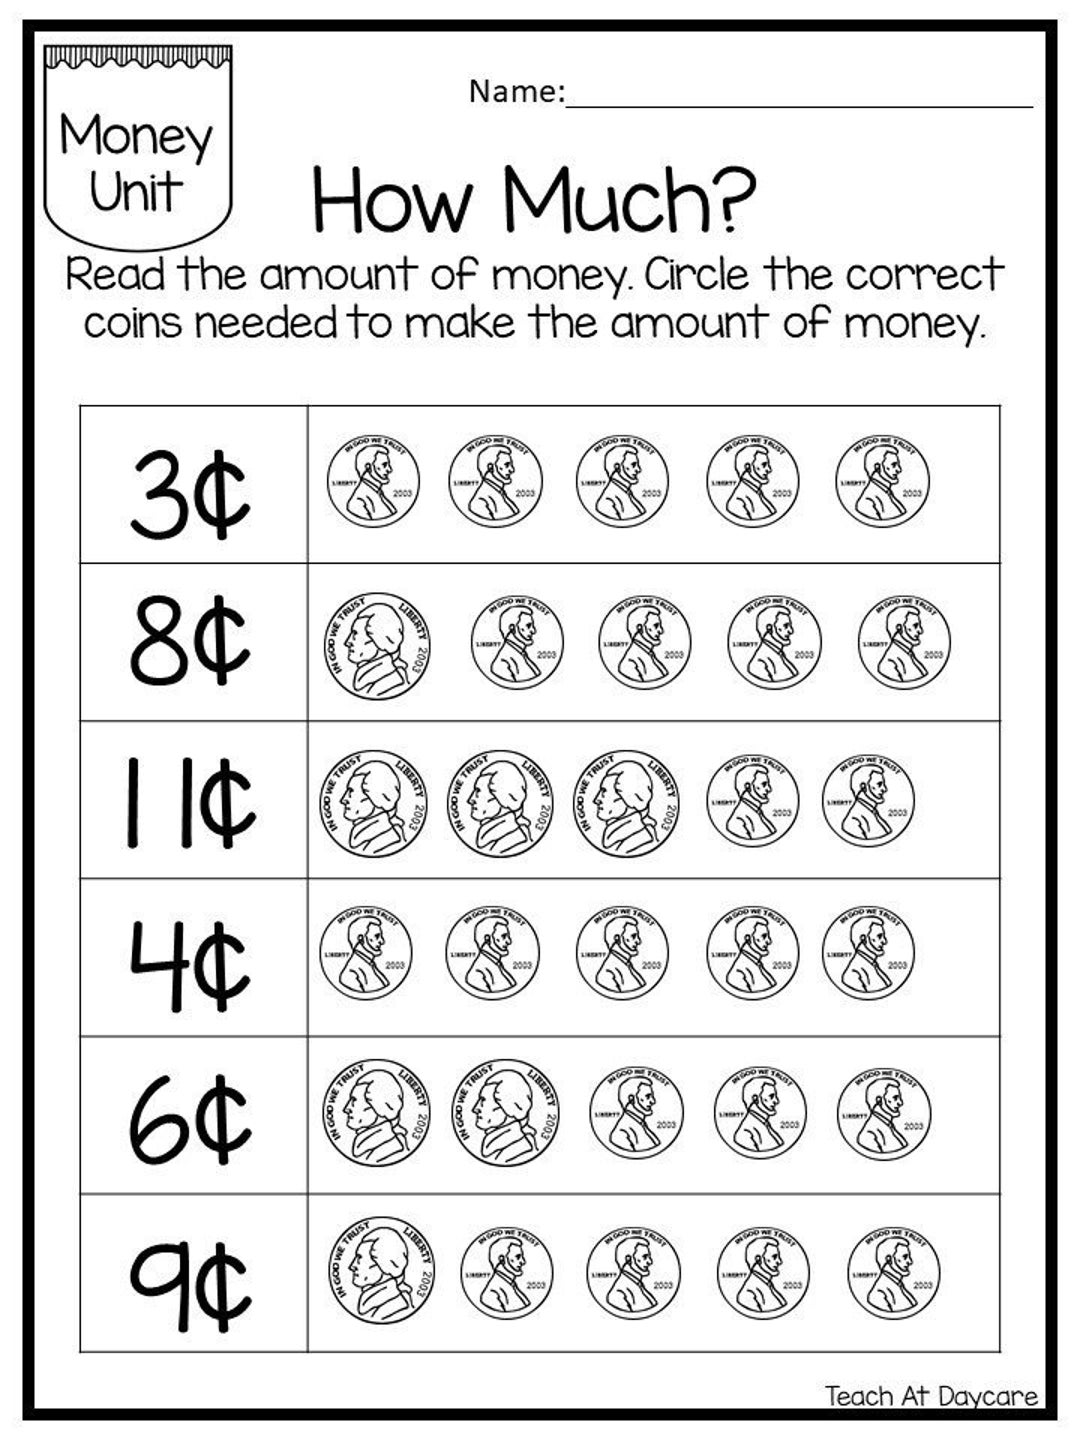 Printable Money Matching Worksheet With Coins – SupplyMe